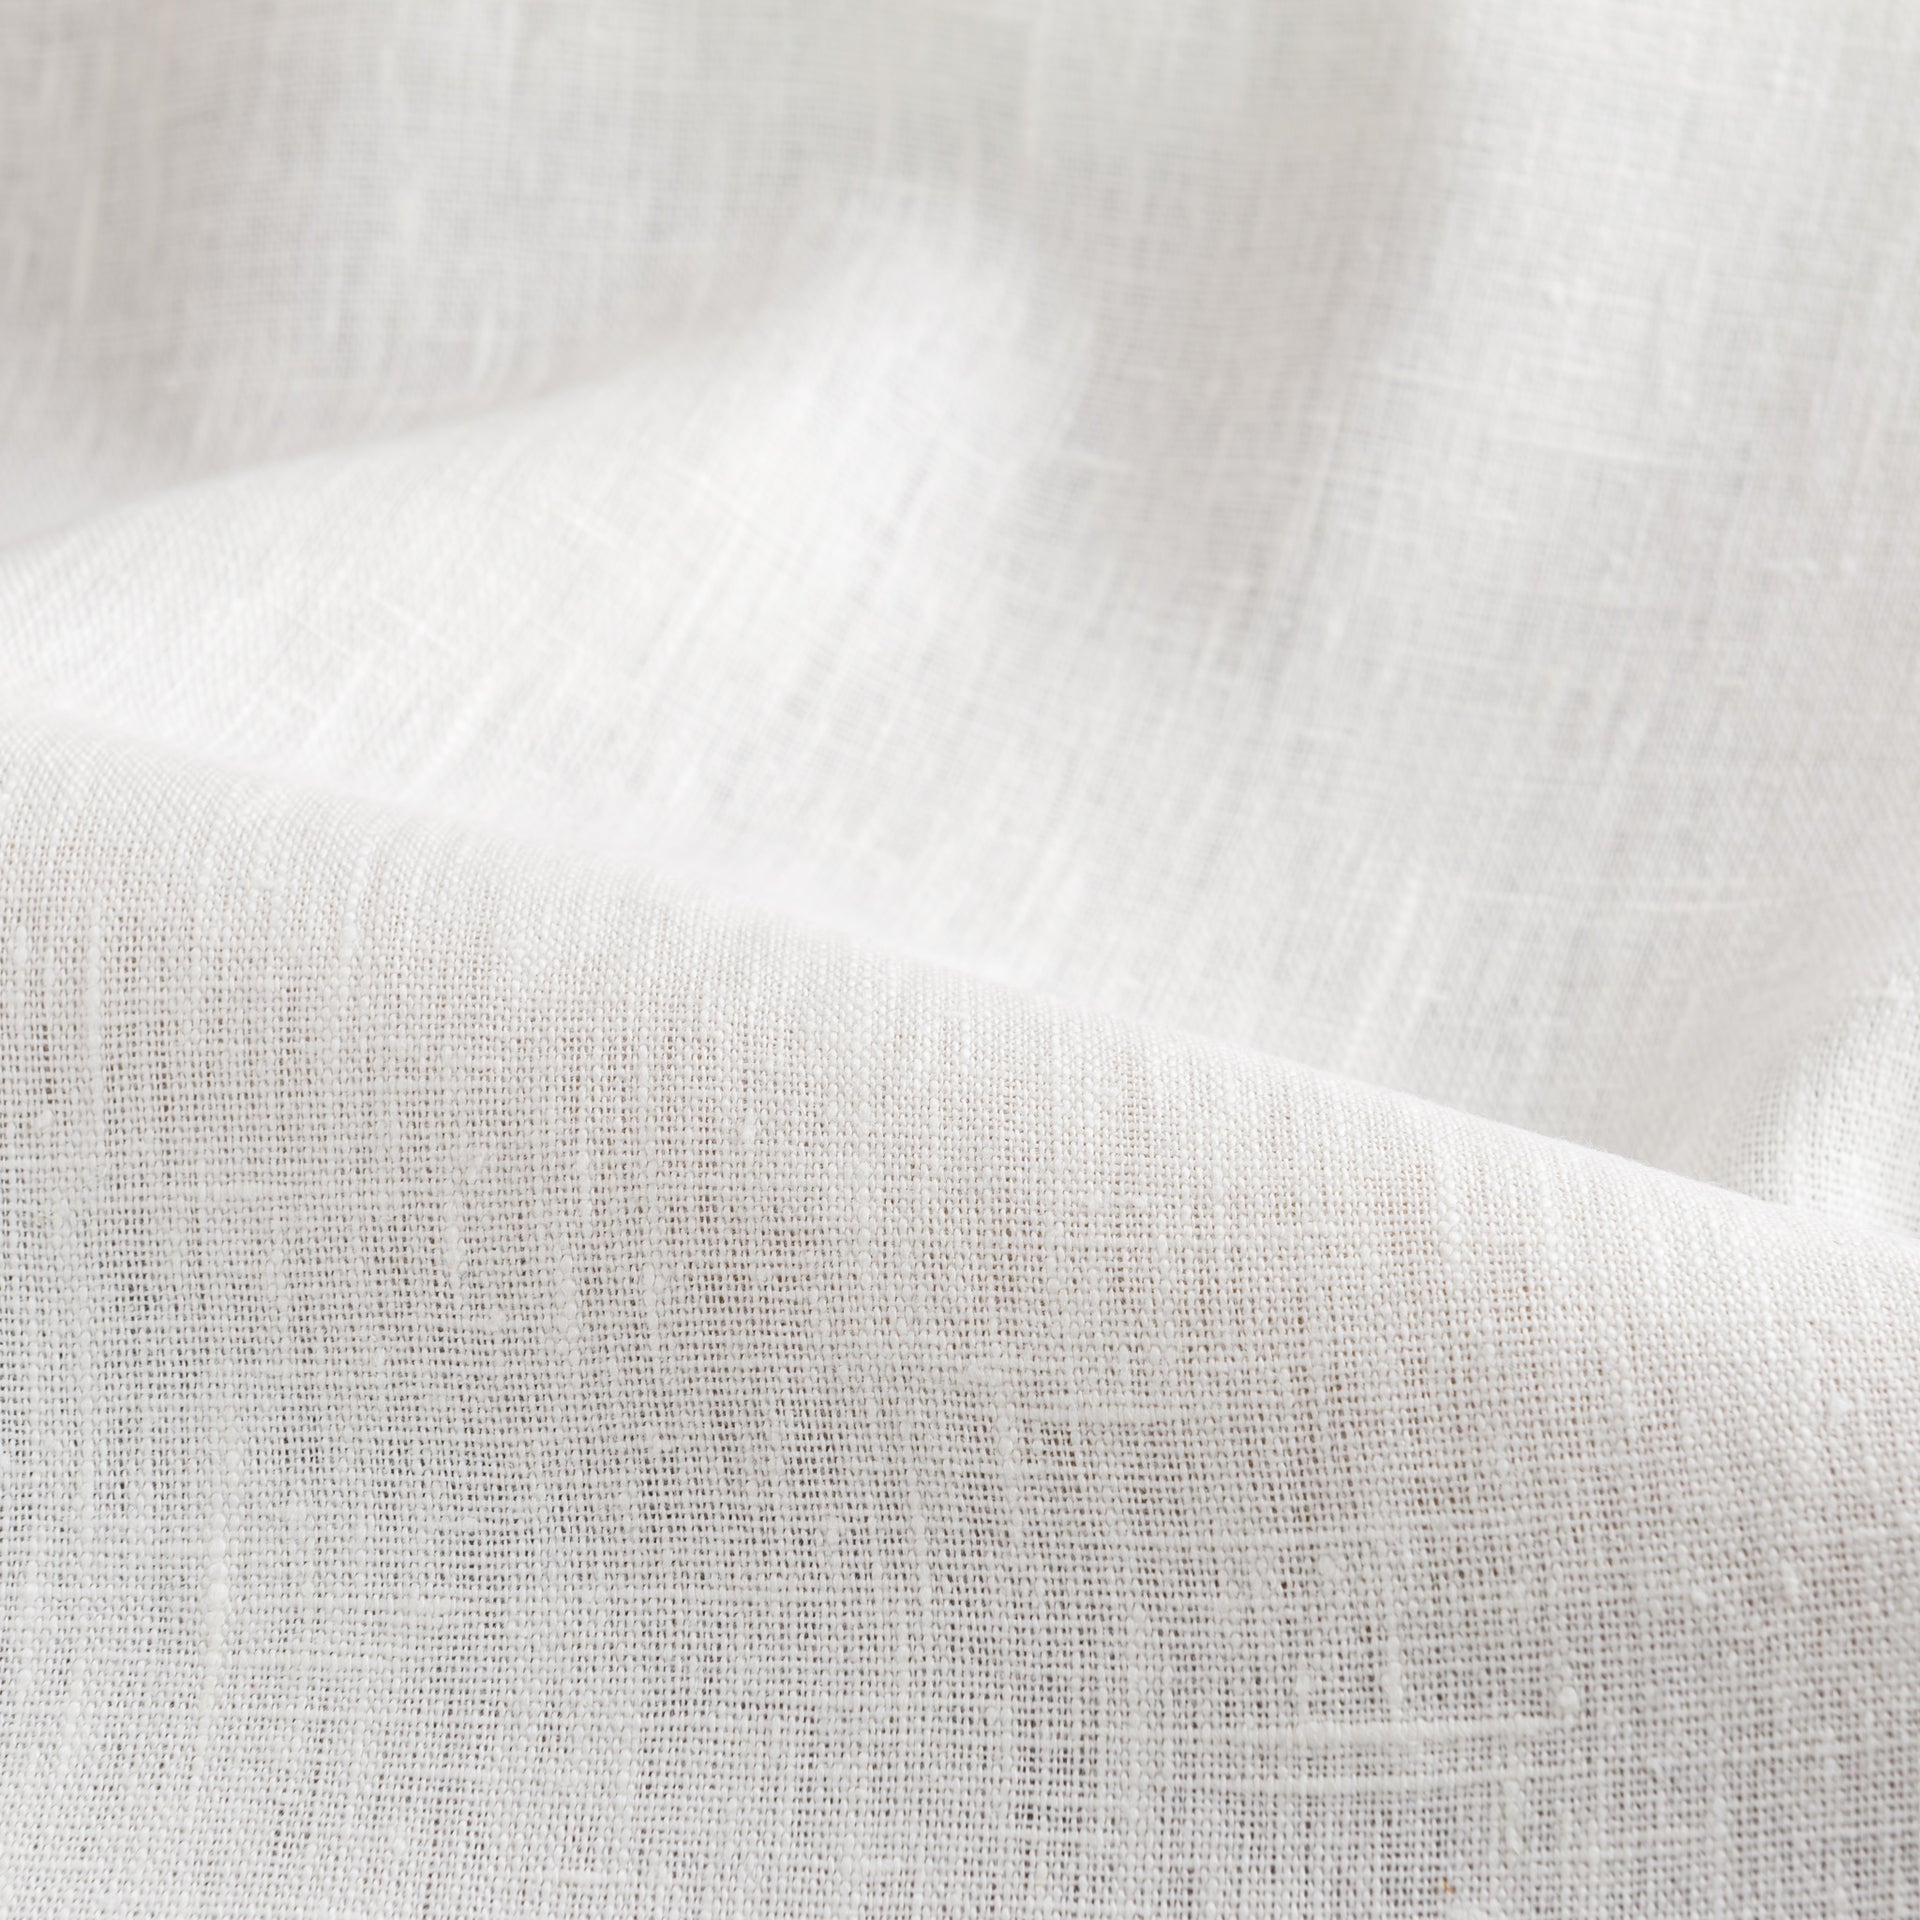 Off-White Heavy Weight Linen Fabric by the Yard - 100% French Natural - Width 52”- 106”